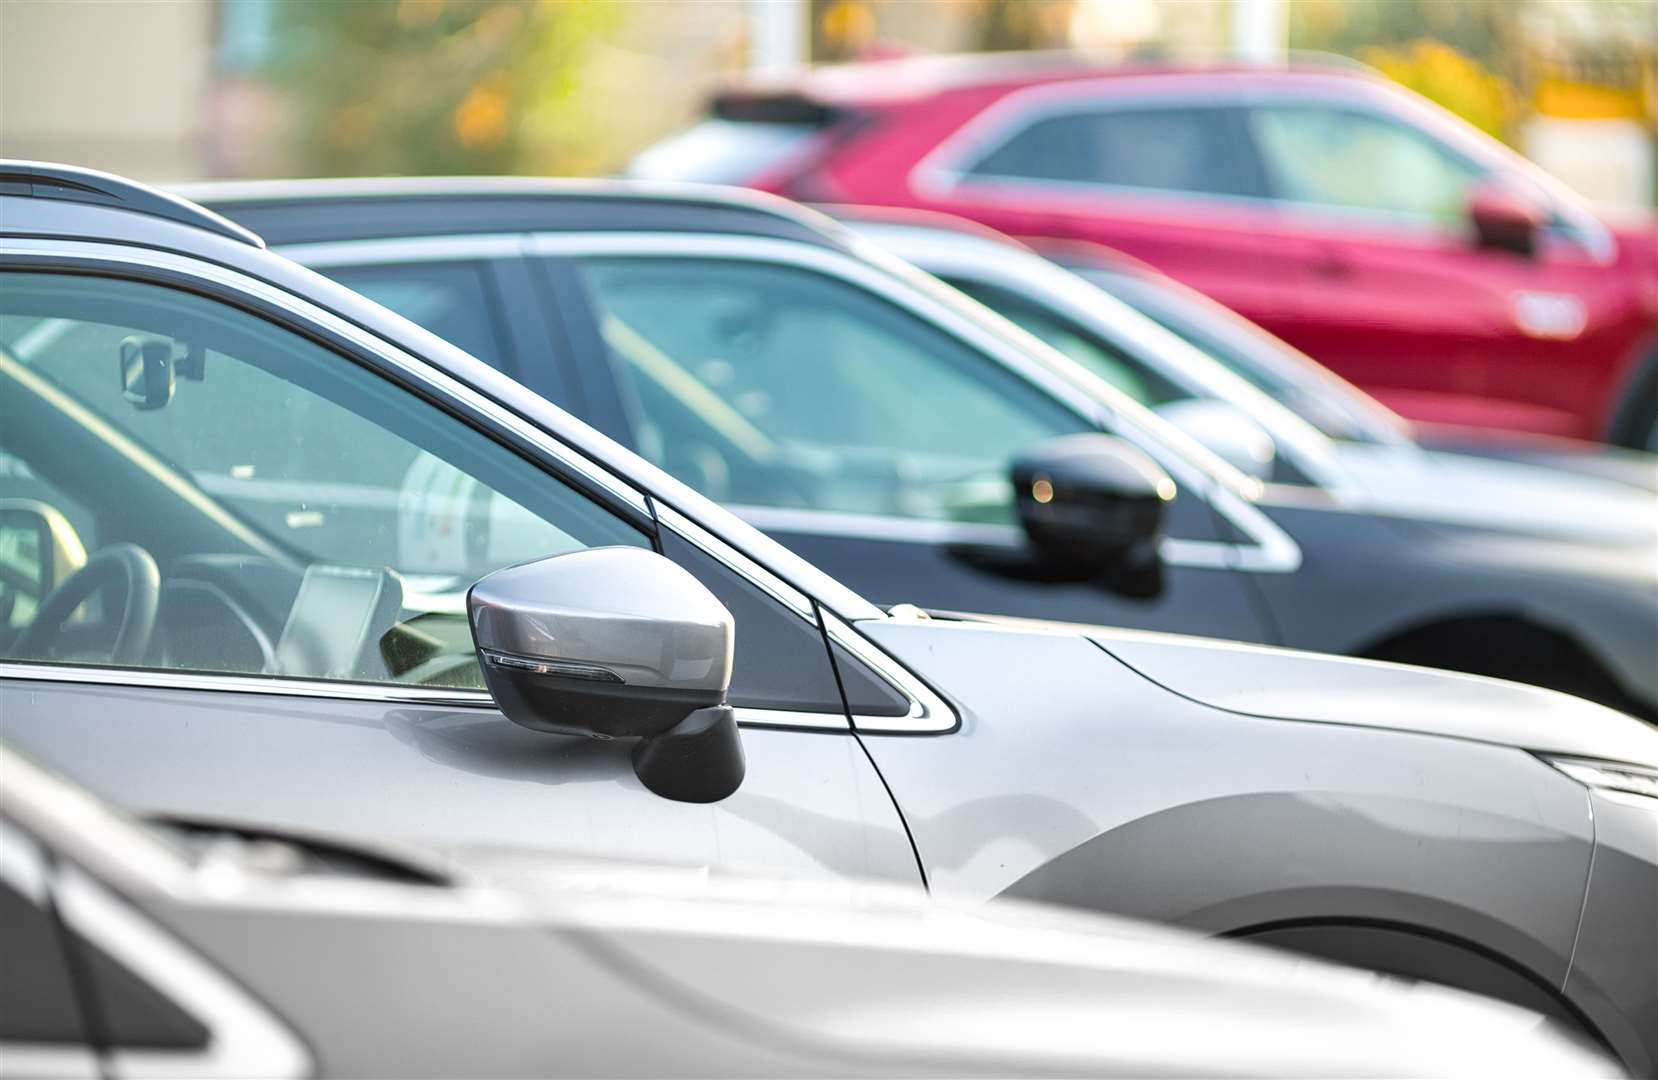 The price of car insurance is rising say experts. Image: iStock.